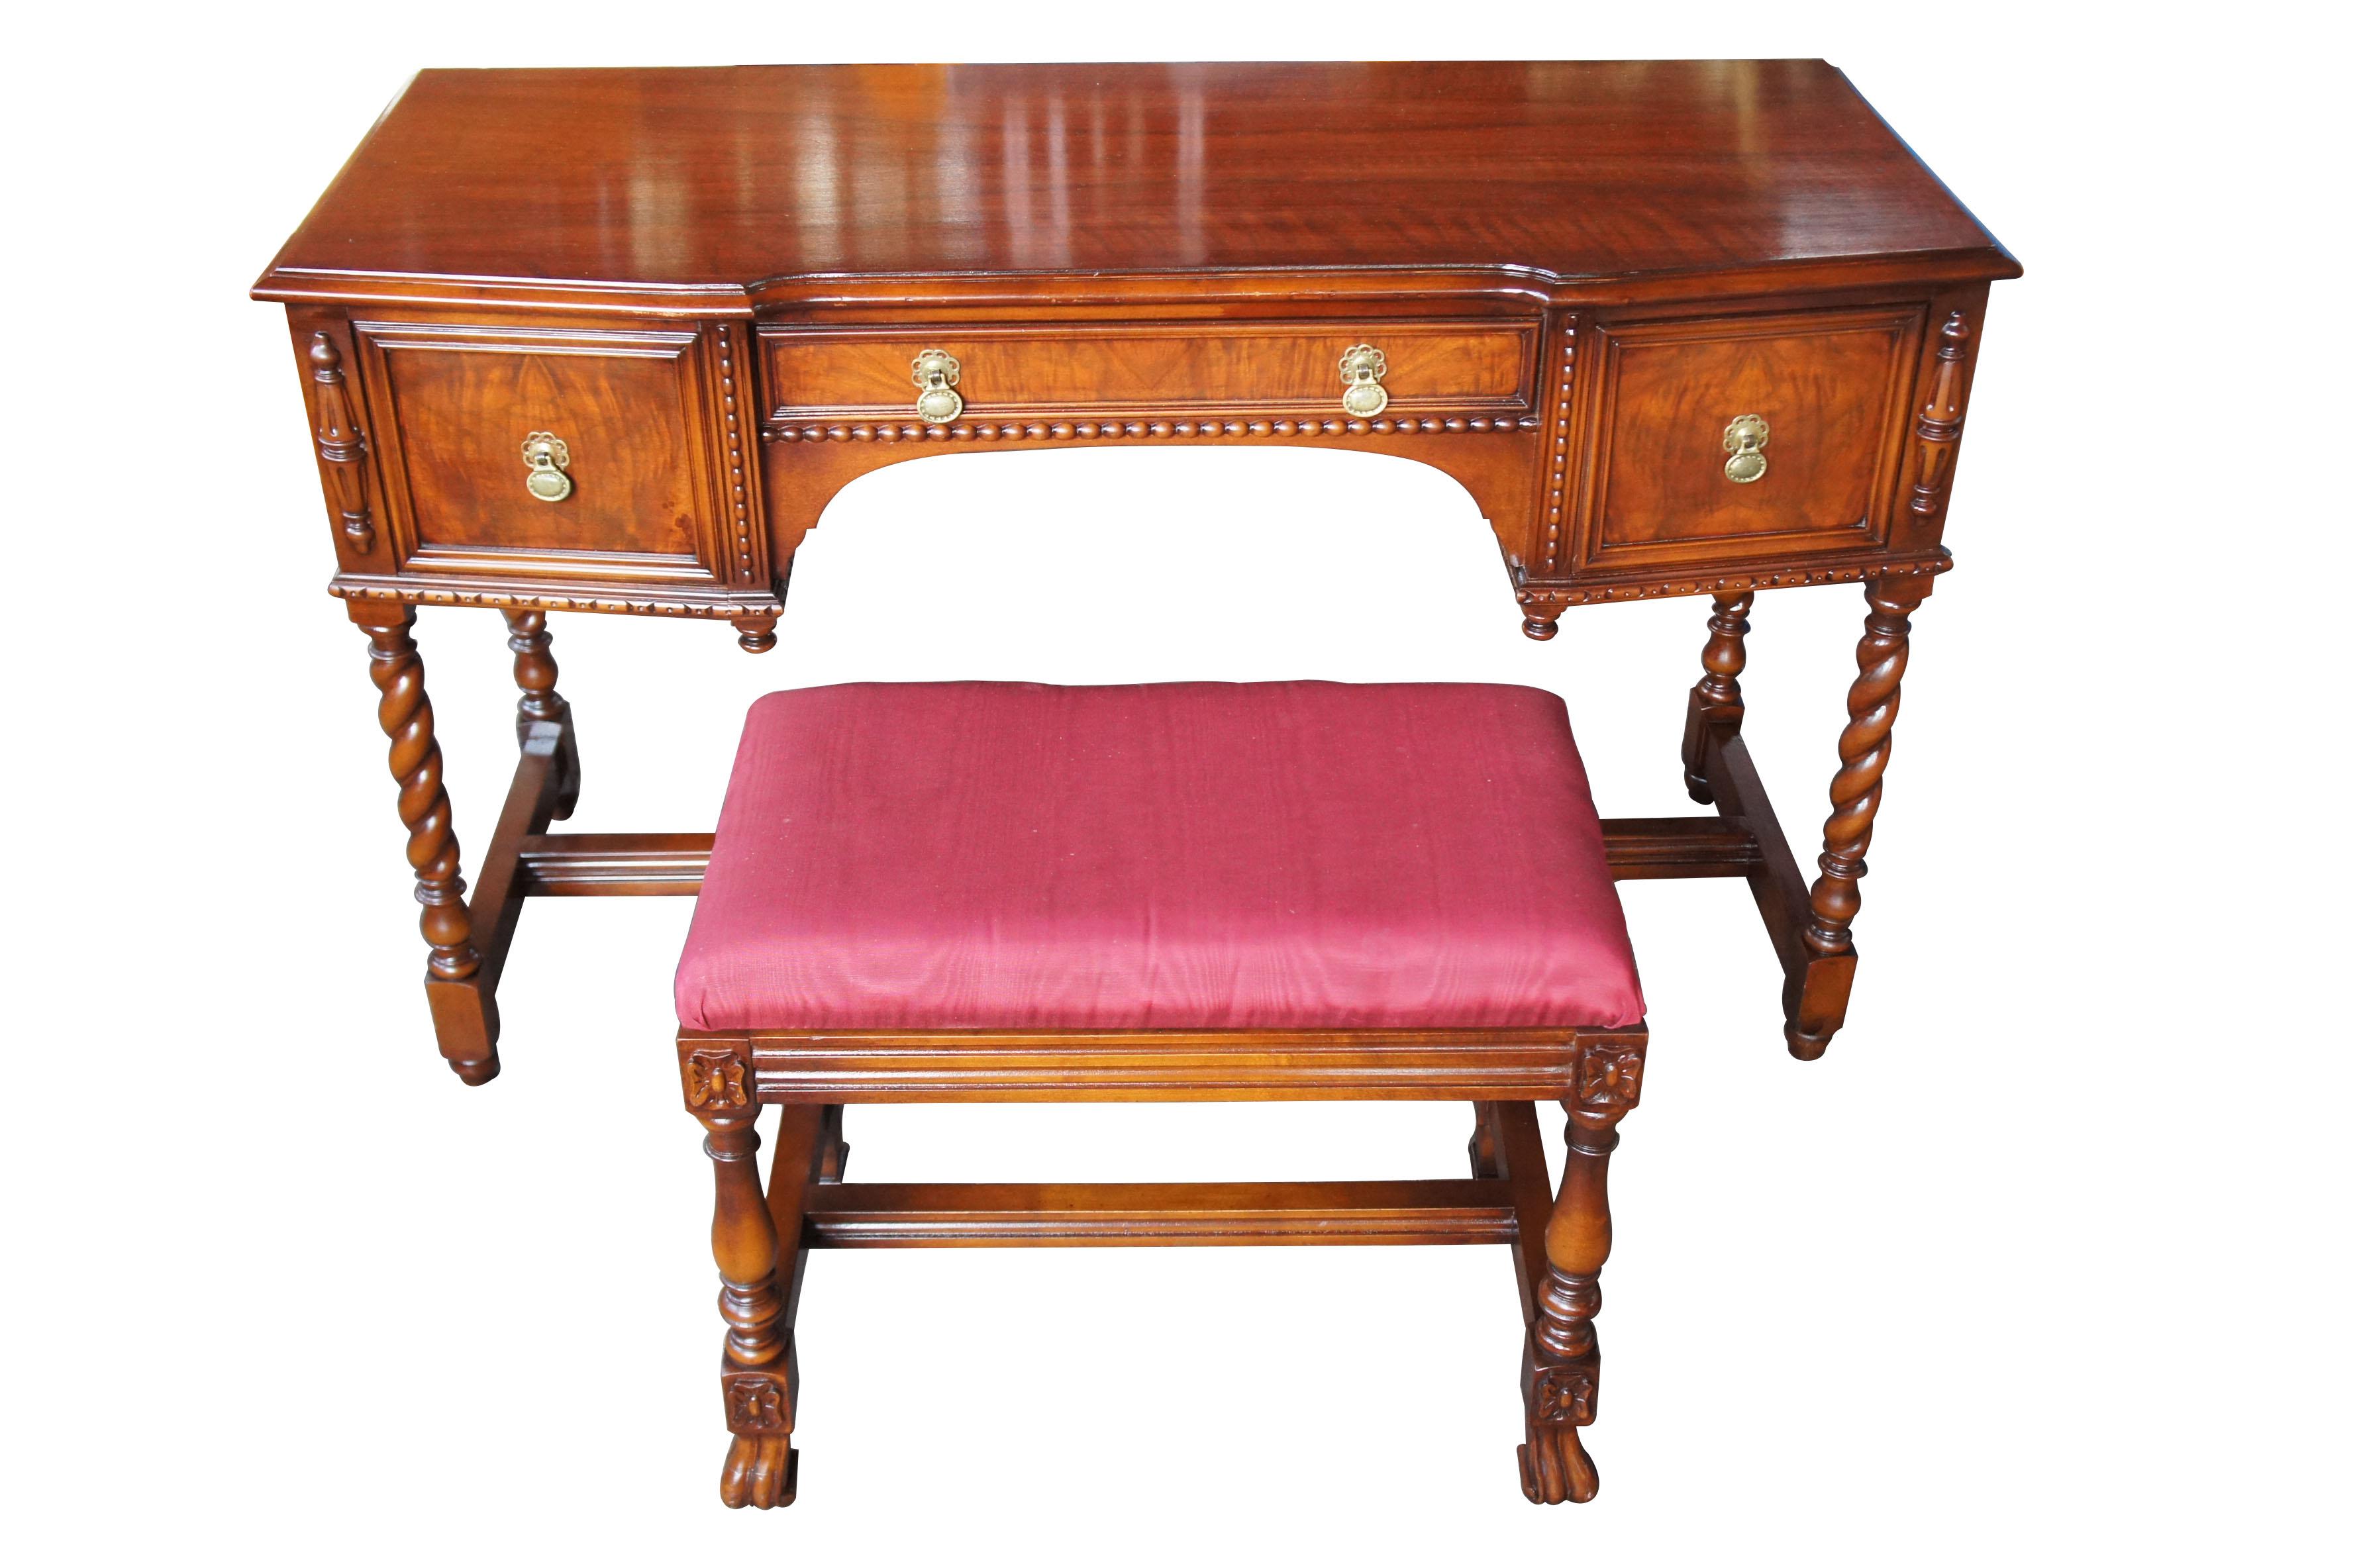 Robert Irwin Antique Jacobean Revival walnut dressing table and mirror with bench

(1919-1953)
Irwin, Robert W. Co 
Grand Rapids, Mi

An exquisite crotched walnut dressing table and mirror with bench by Robert W. Irwin Furniture Company.